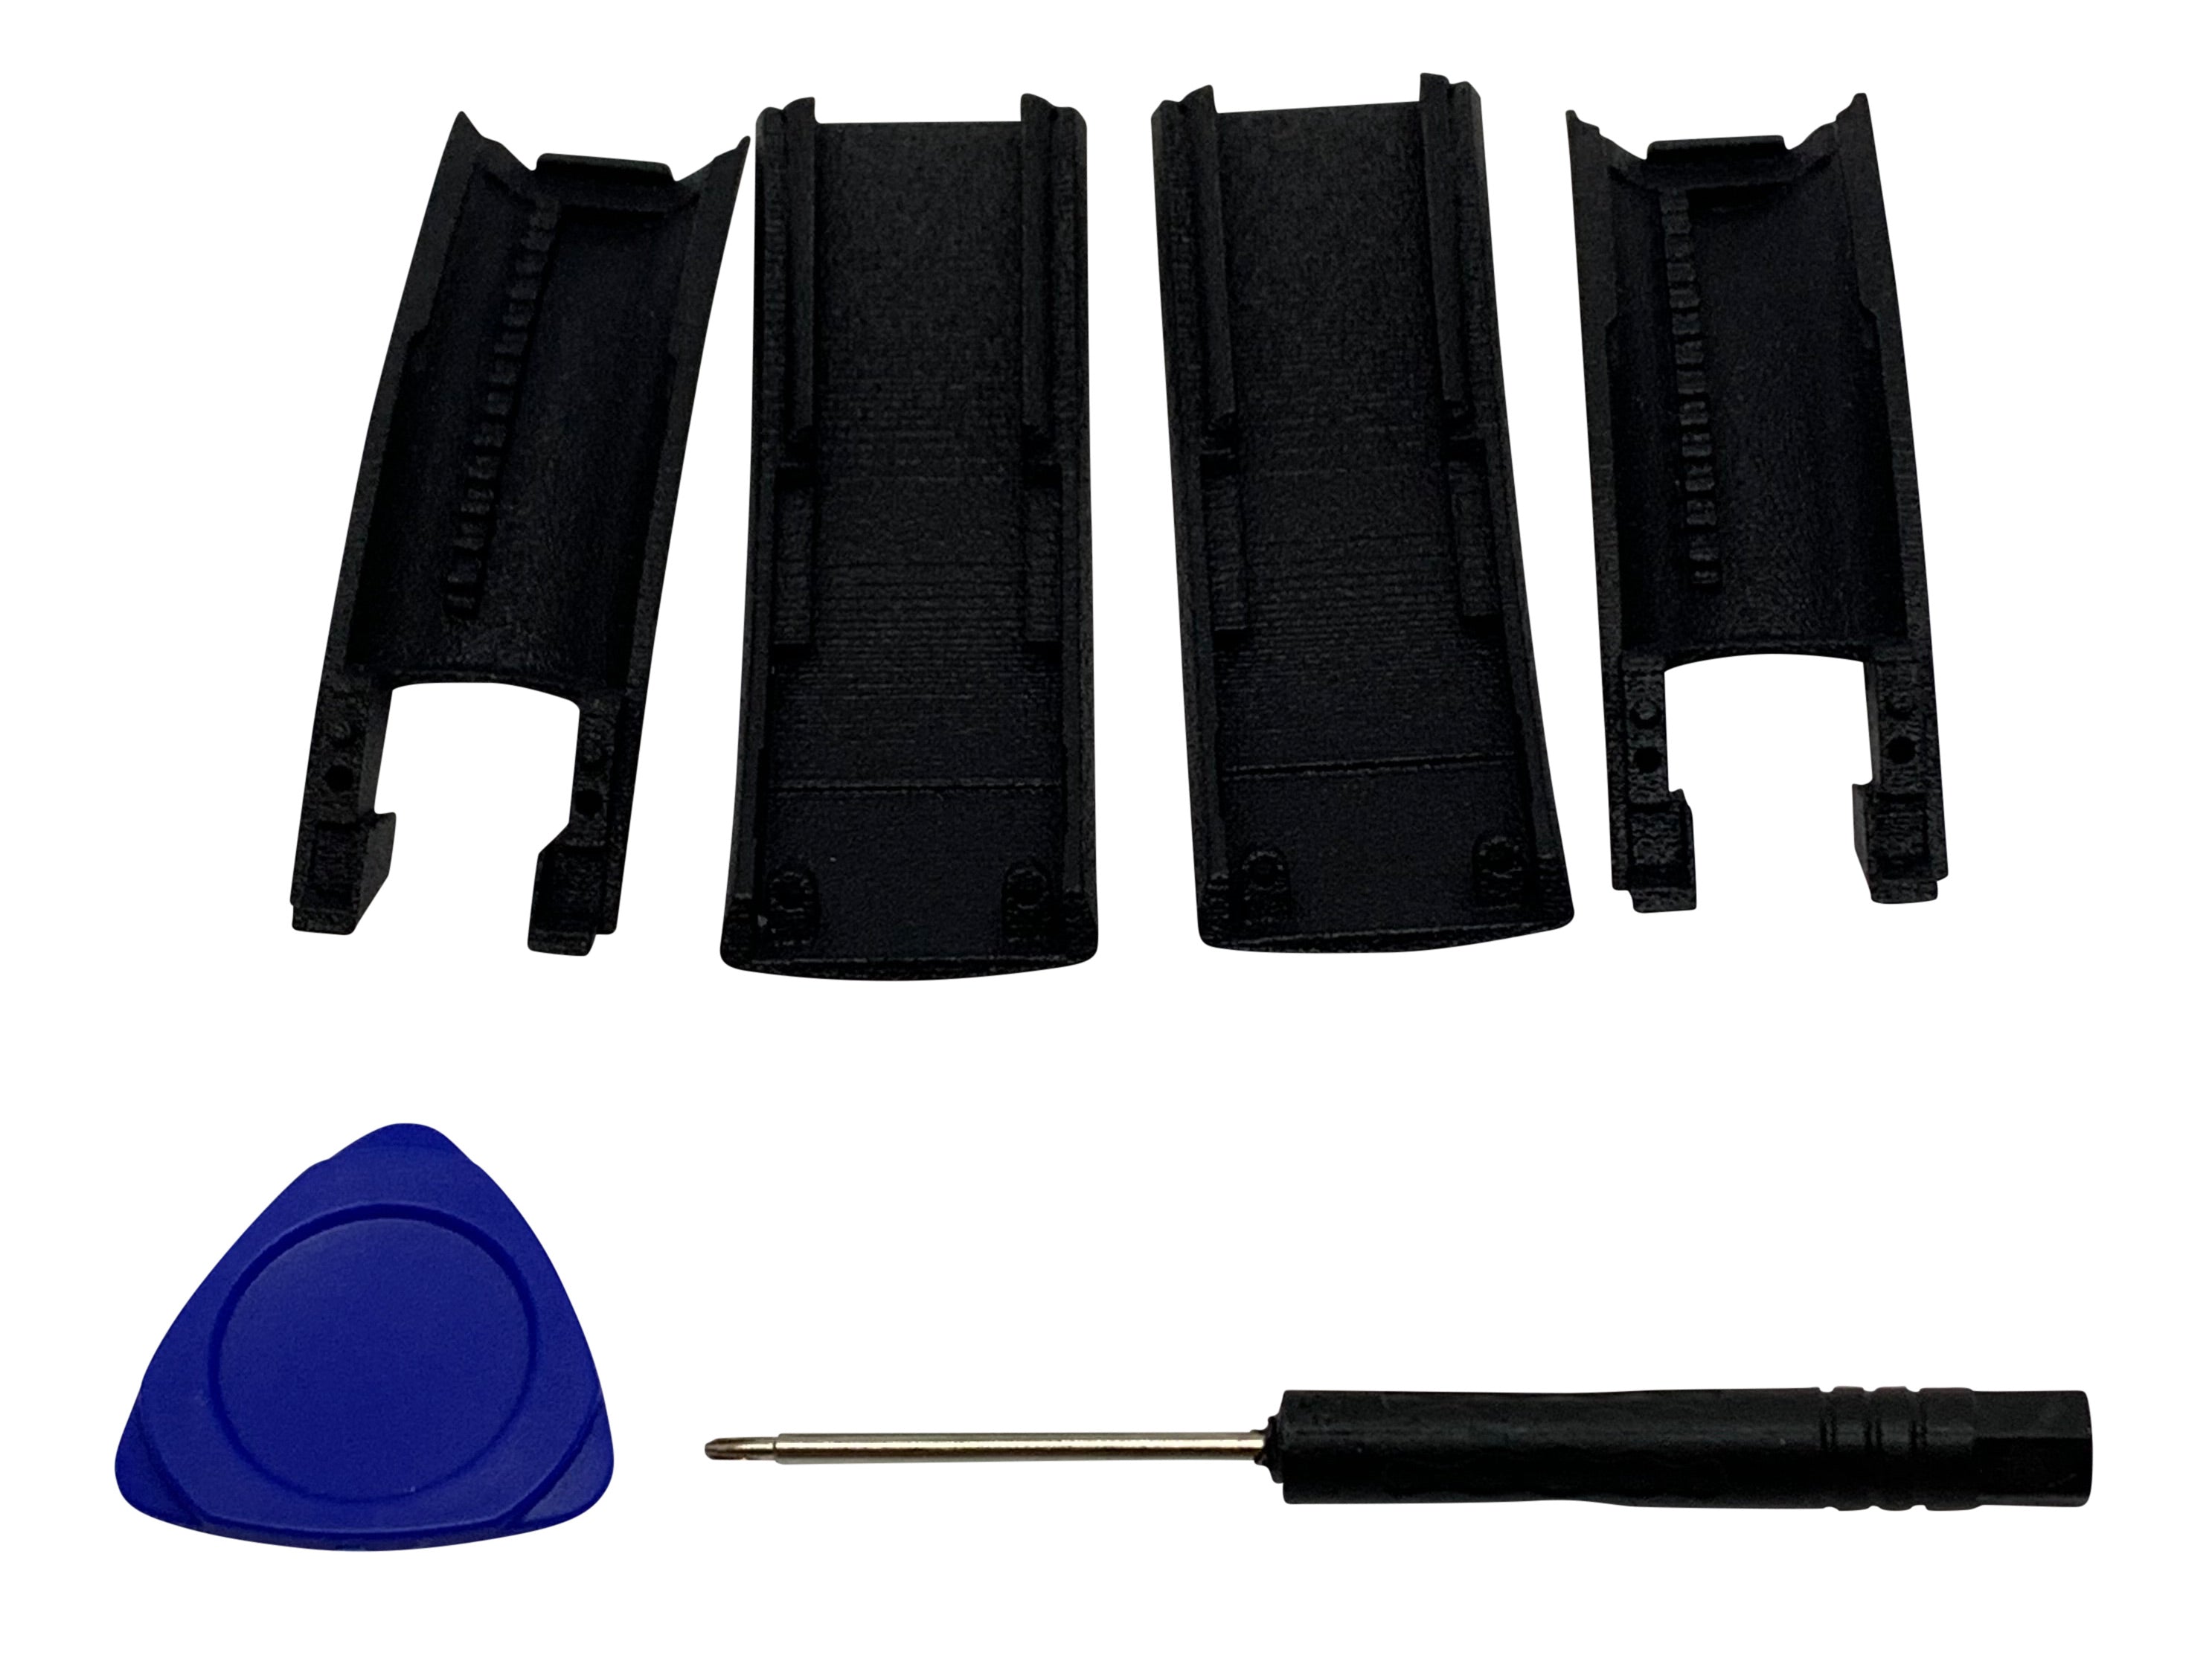 Replacement Side Cover Slider Parts Headband UPGRADE KIT for Sony WH-1000XM4 WH1000XM4 Headphones - CentralSound